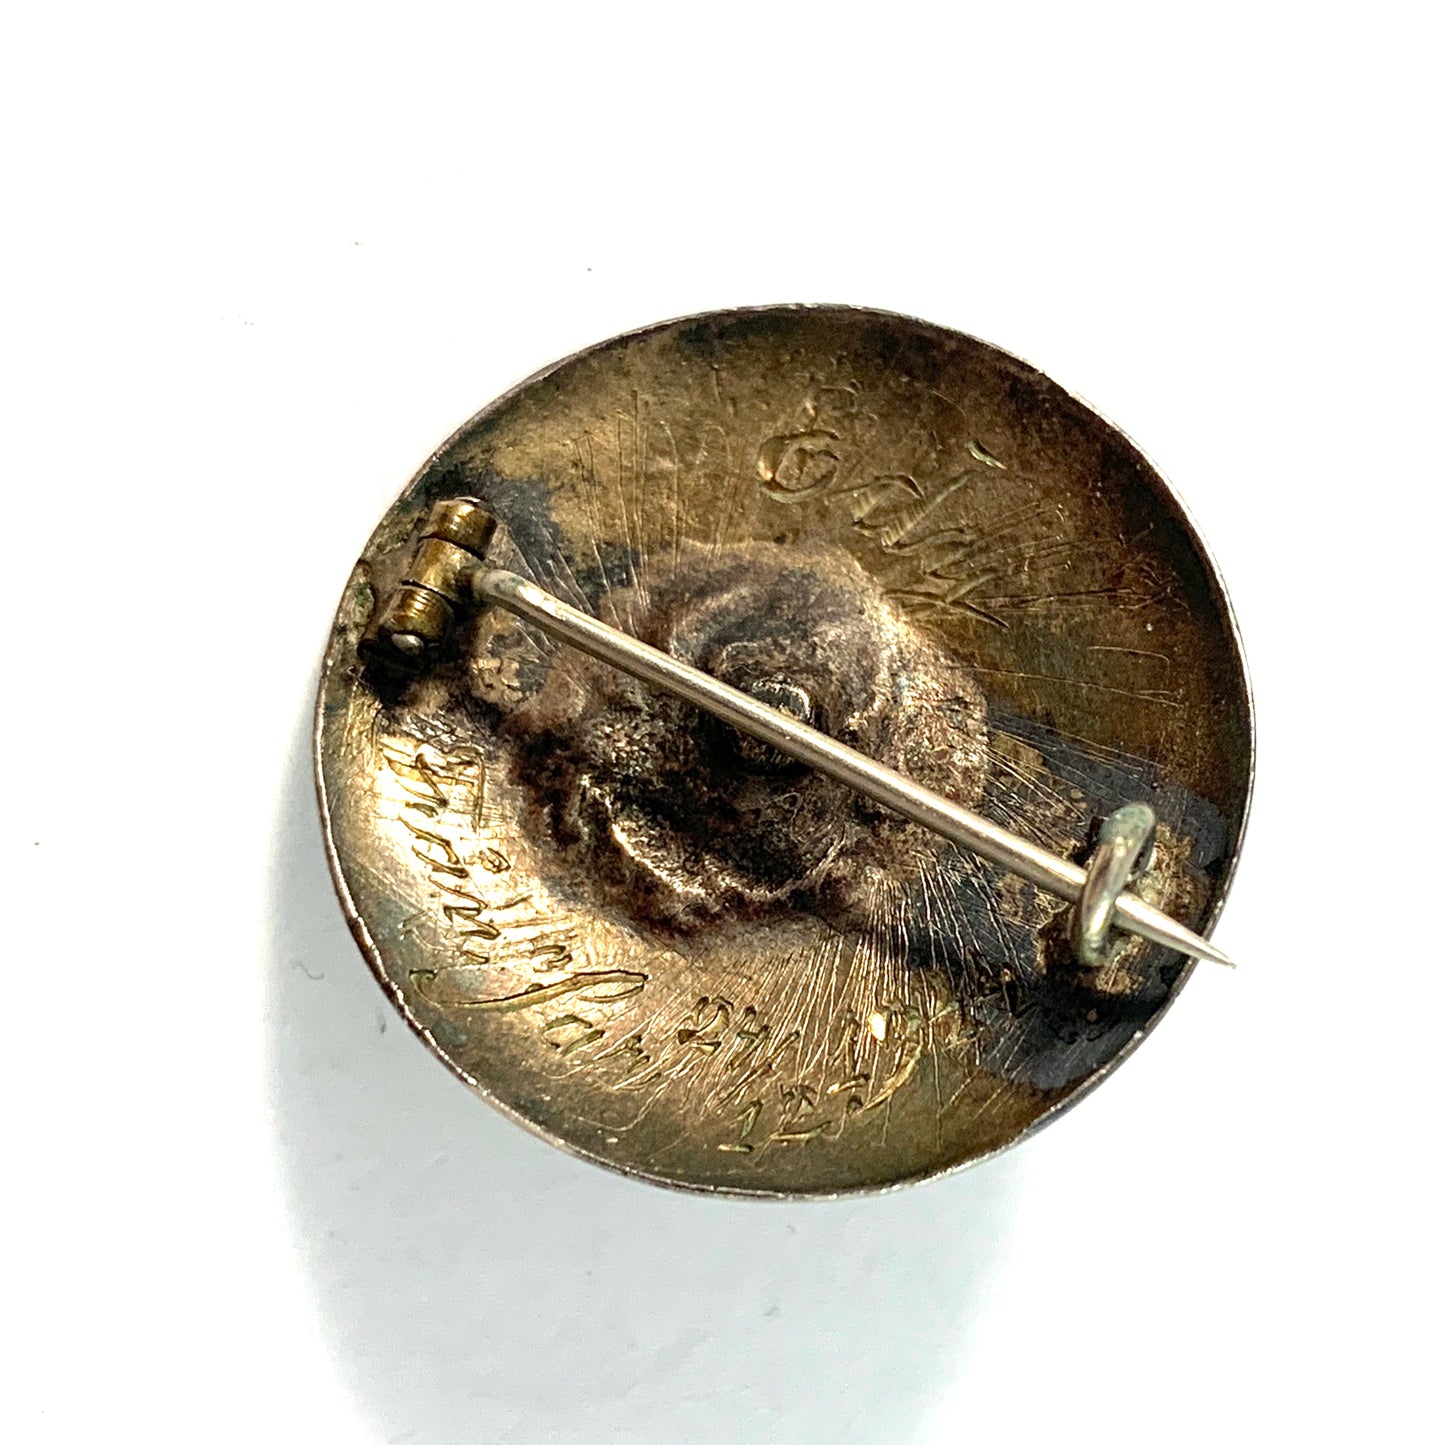 Sweden year 1944. Solid Silver Paste Stone Brooch. Made from early 1800s Button